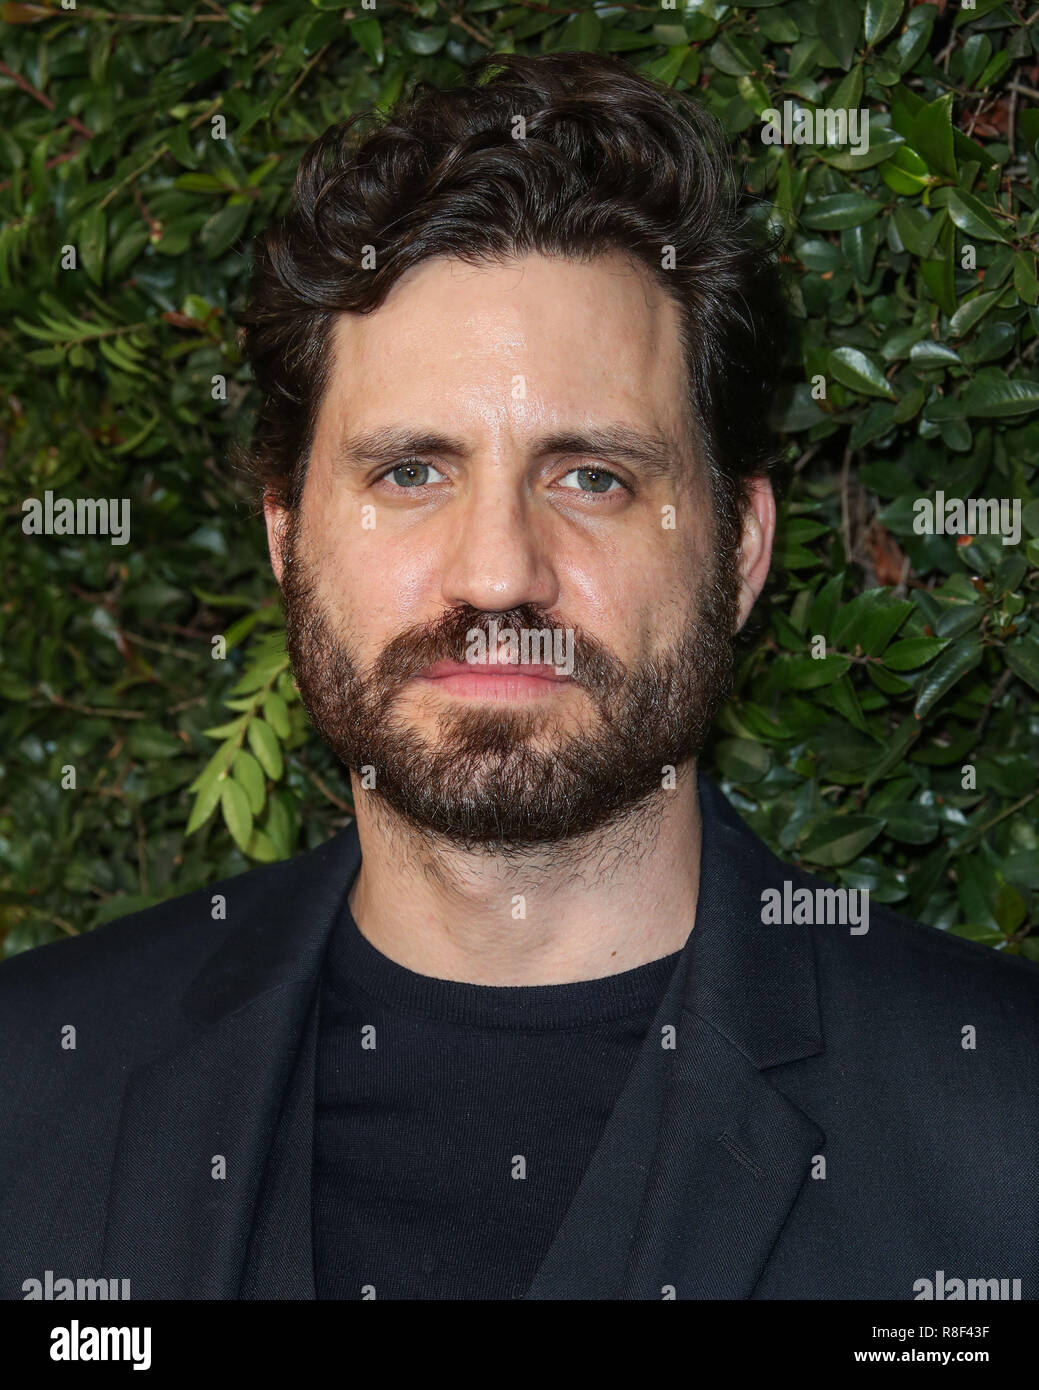 BEVERLY HILLS, LOS ANGELES, CA, USA - MARCH 03: Edgar Ramirez at the Chanel And Charles Finch Pre-Oscar Awards Dinner 2018 held at Madeo Restaurant on March 3, 2018 in Beverly Hills, Los Angeles, California, United States. (Photo by Xavier Collin/Image Press Agency) Stock Photo